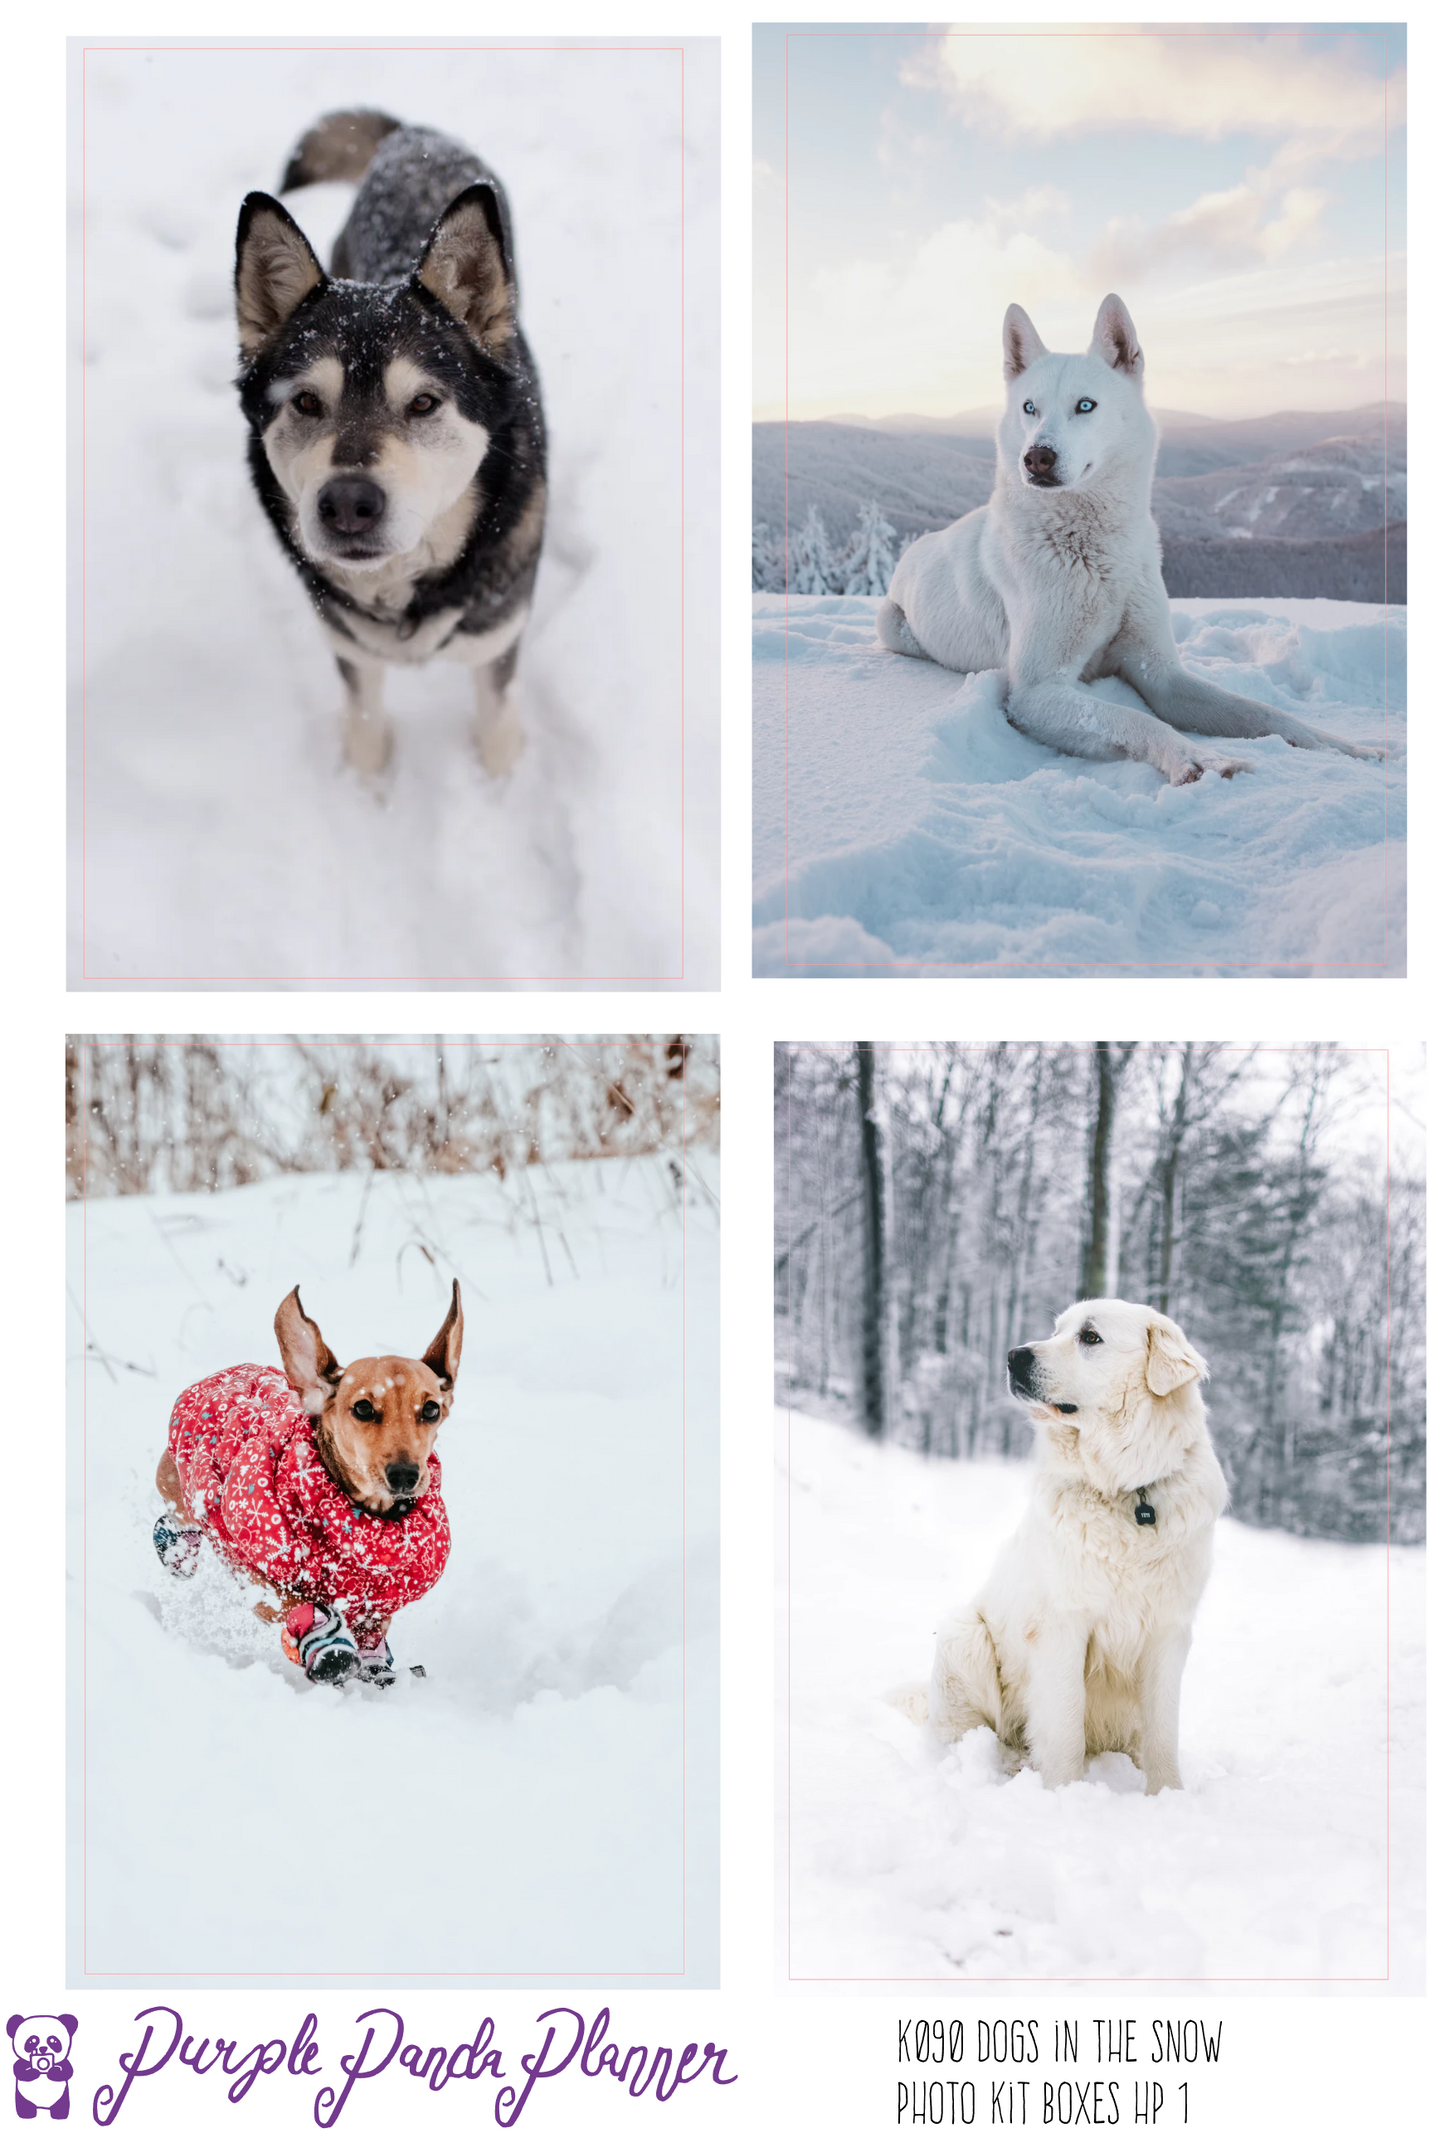 HP Big - Dogs in the Snow Photo Kit for Planner or Bullet Journal, Functional Stickers (K090-93)